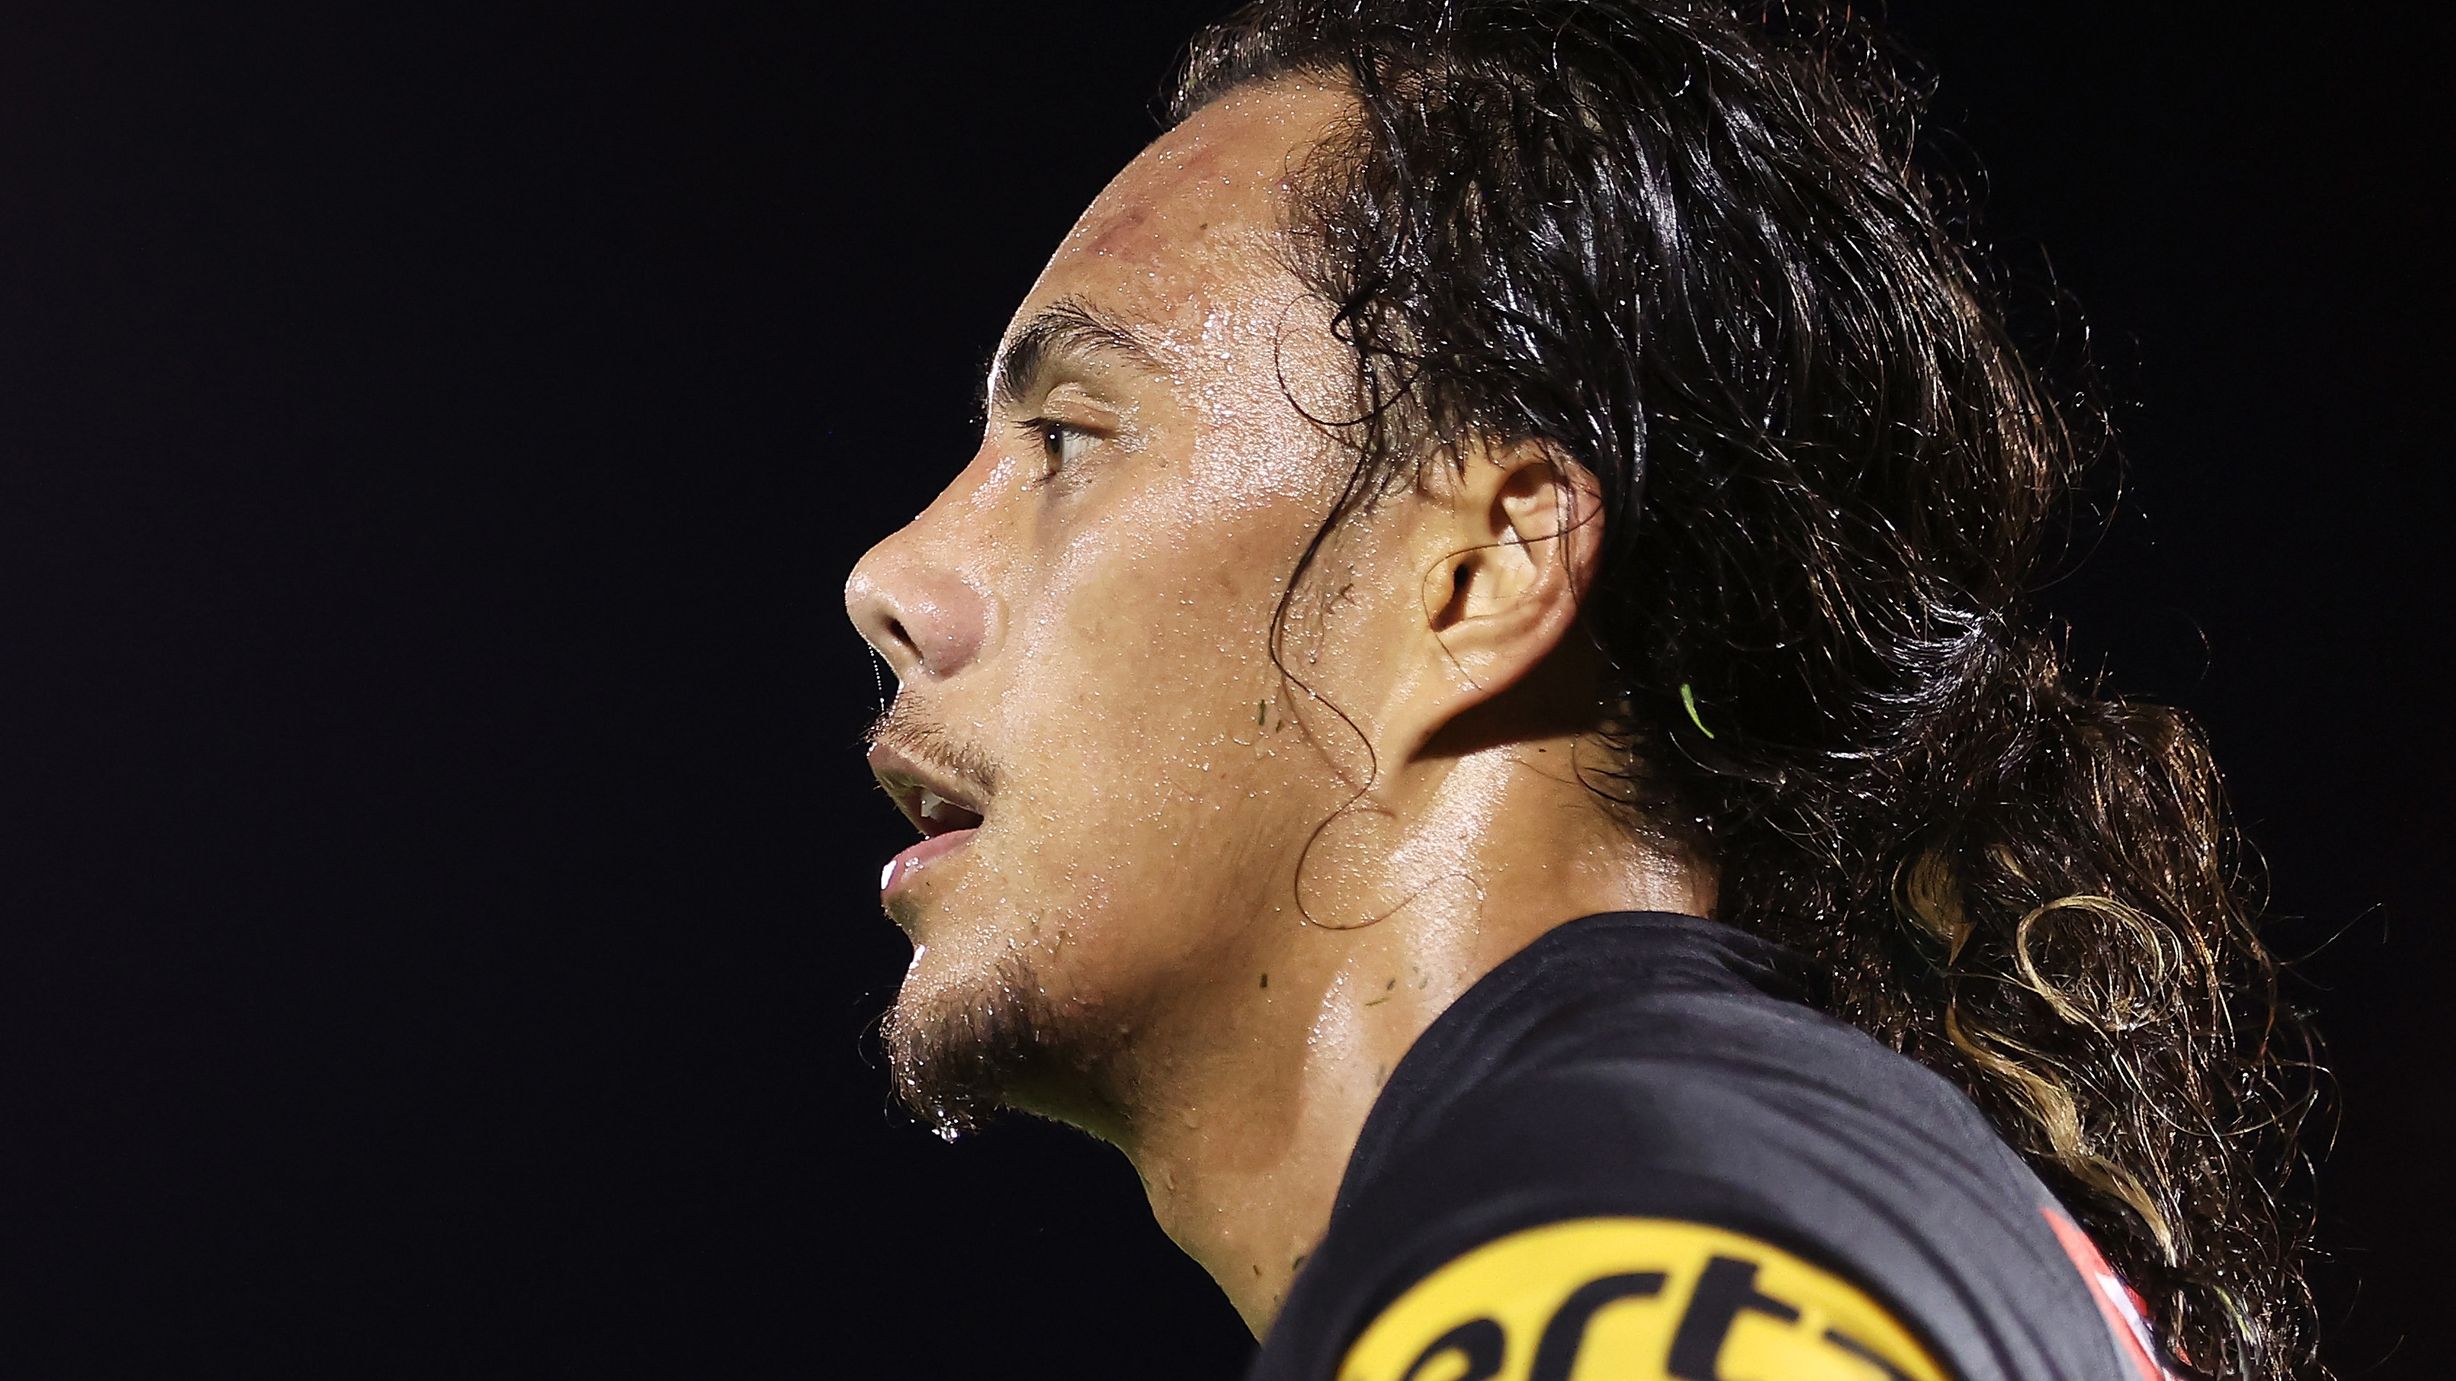 PENRITH, AUSTRALIA - MARCH 03: Jarome Luai of the Panthers watches on during the round NRL match between the Penrith Panthers and the Brisbane Broncos at BlueBet Stadium on March 03, 2023 in Penrith, Australia. (Photo by Mark Kolbe/Getty Images)